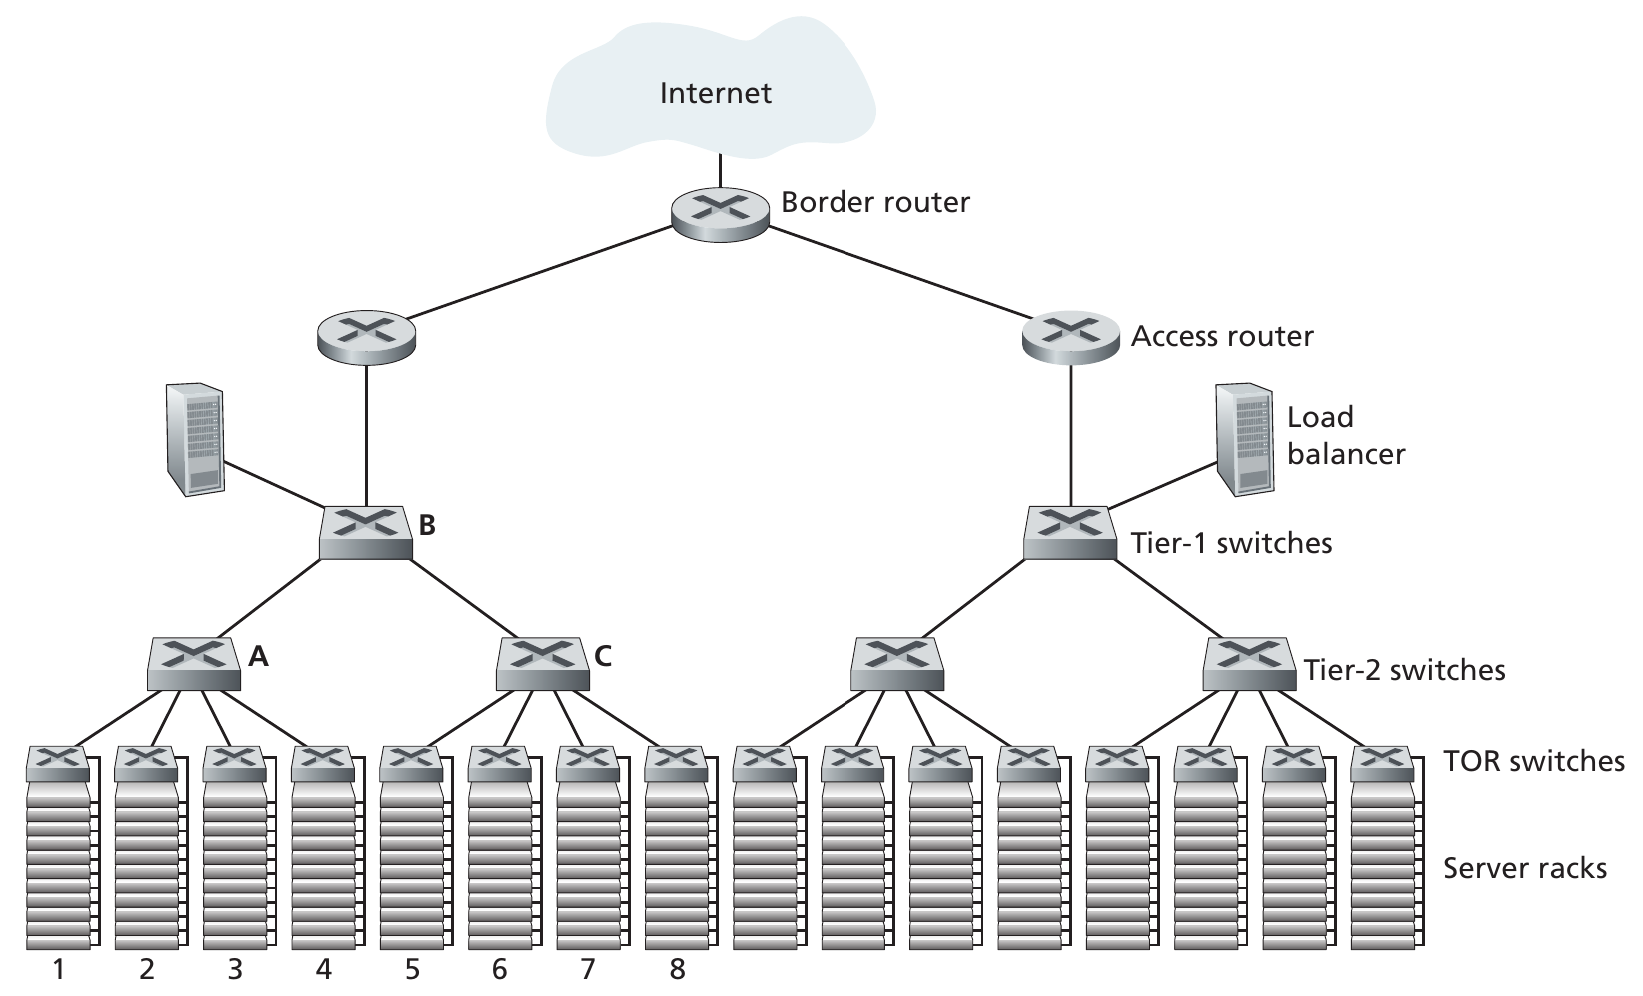 A data center network with a hierarchical topology